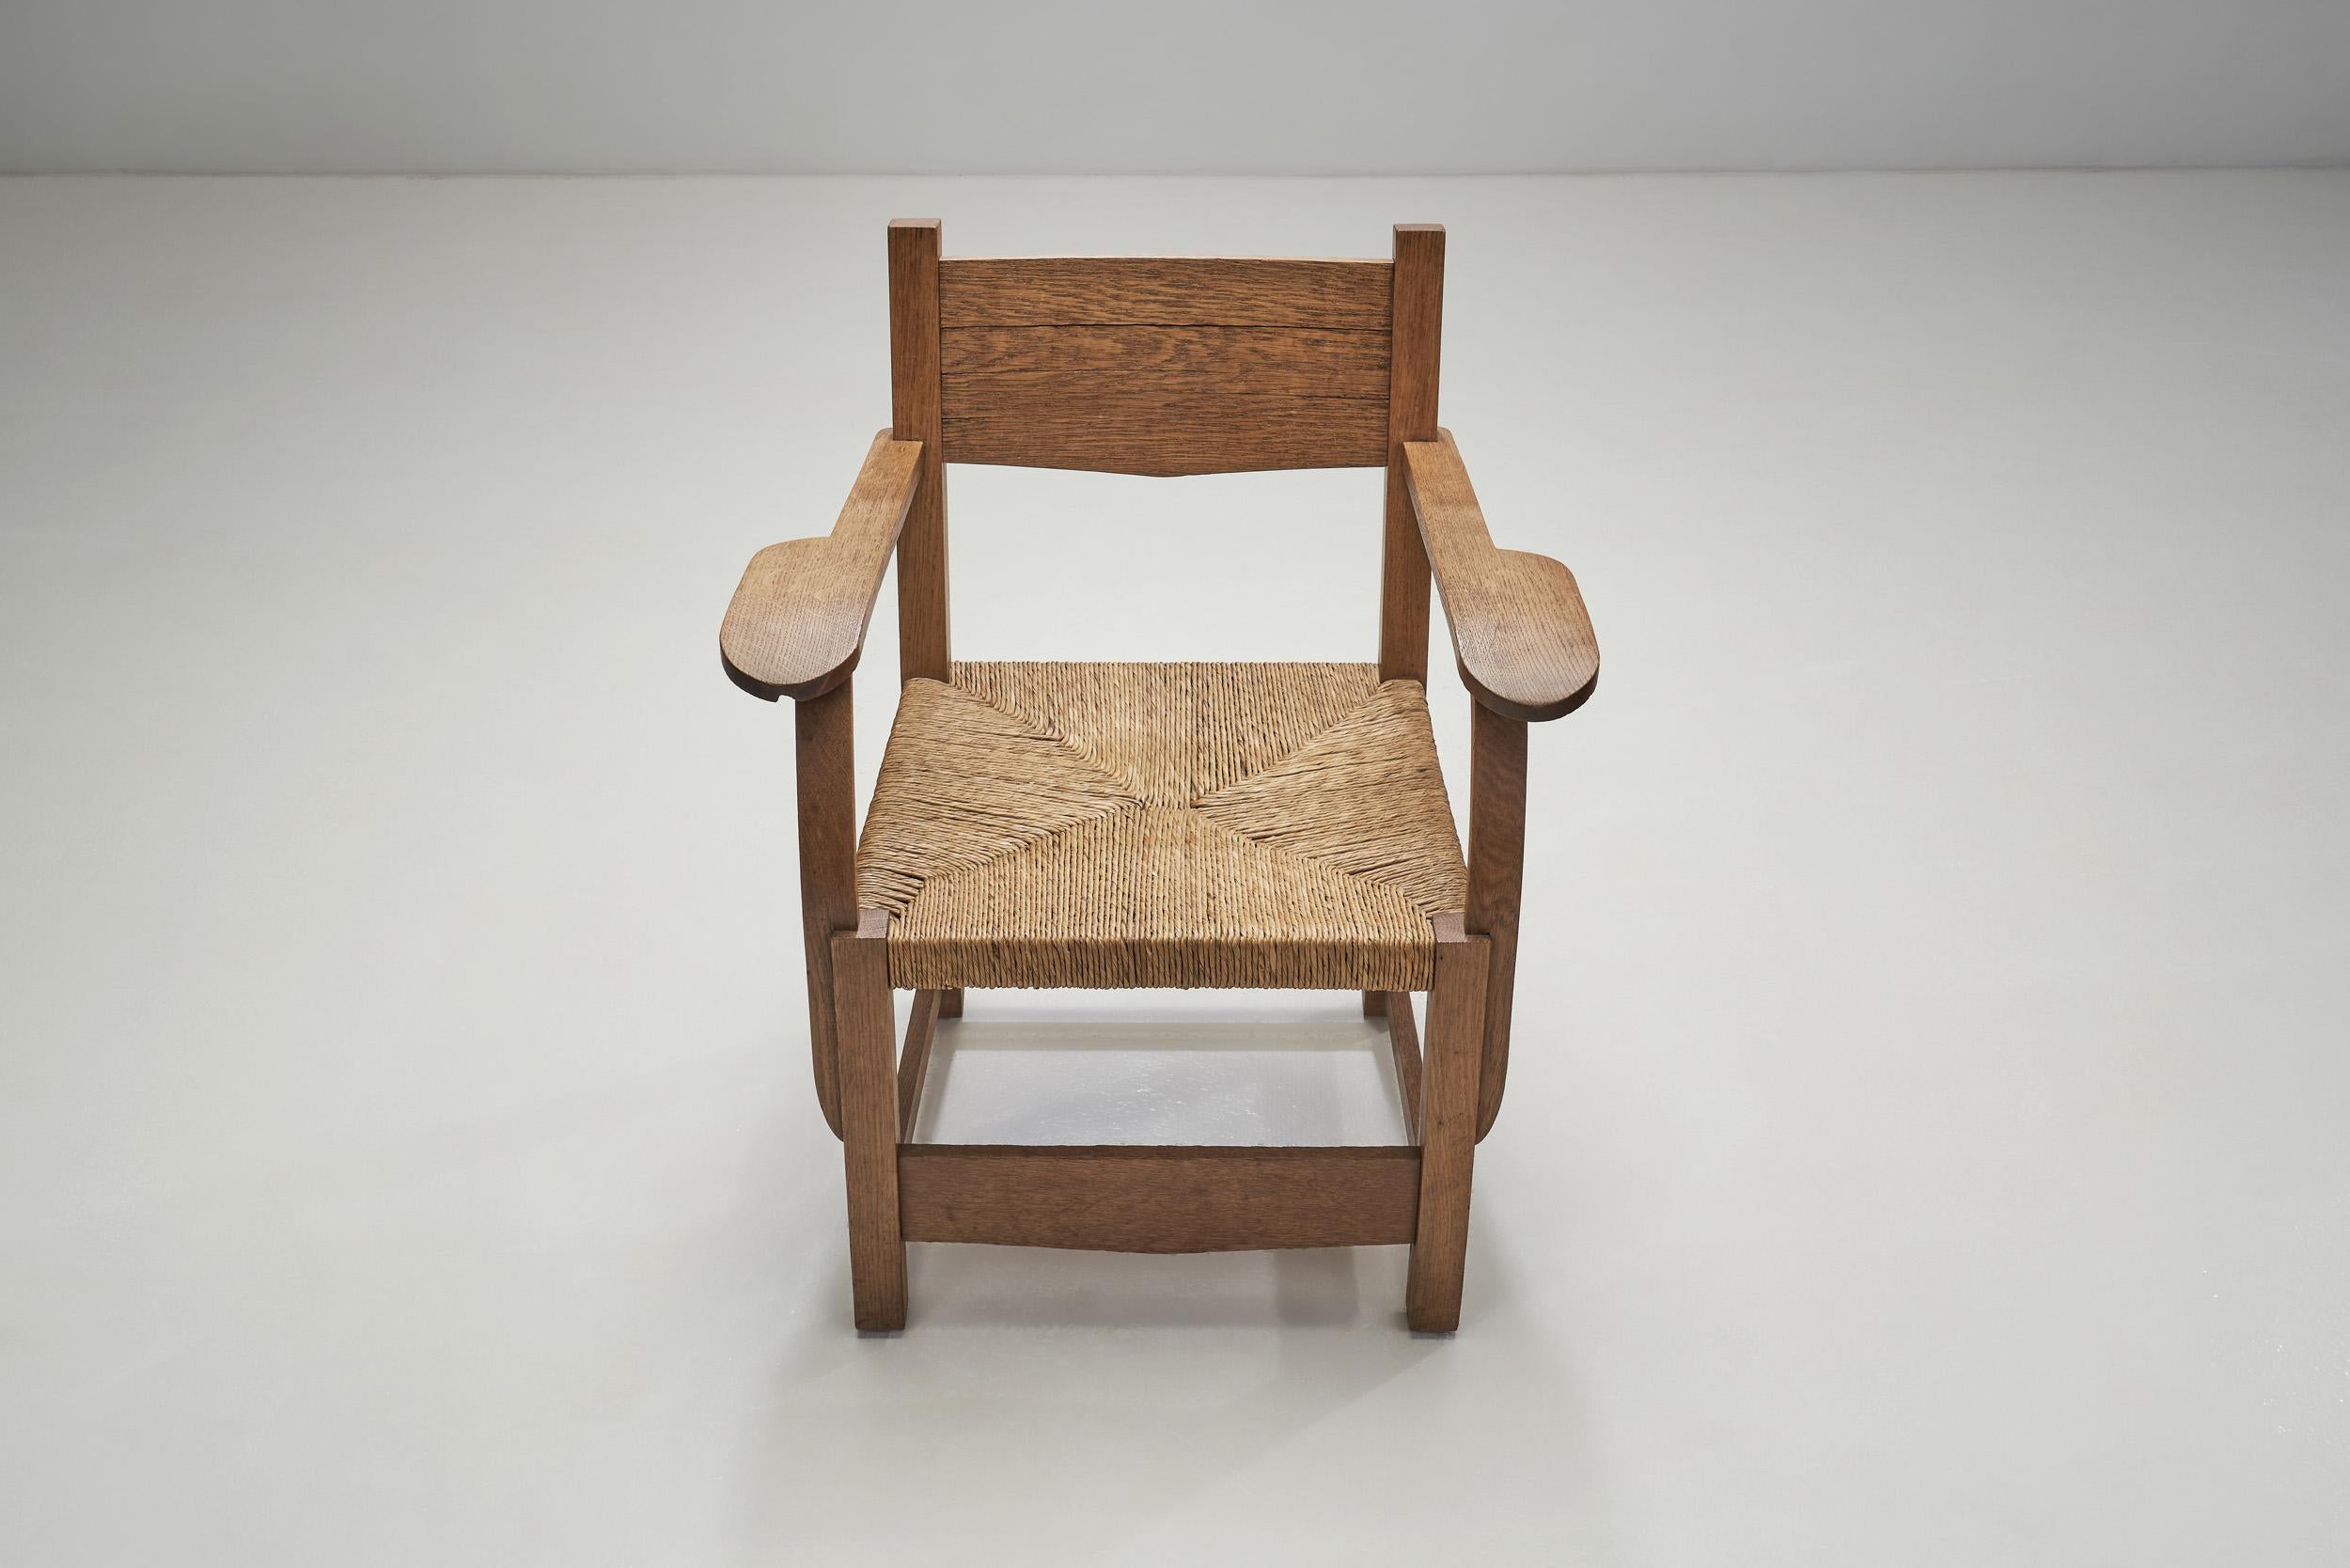 Papercord Oak Side Chair with Paper Cord Seat by a Danish Cabinetmaker, Denmark ca 1950s